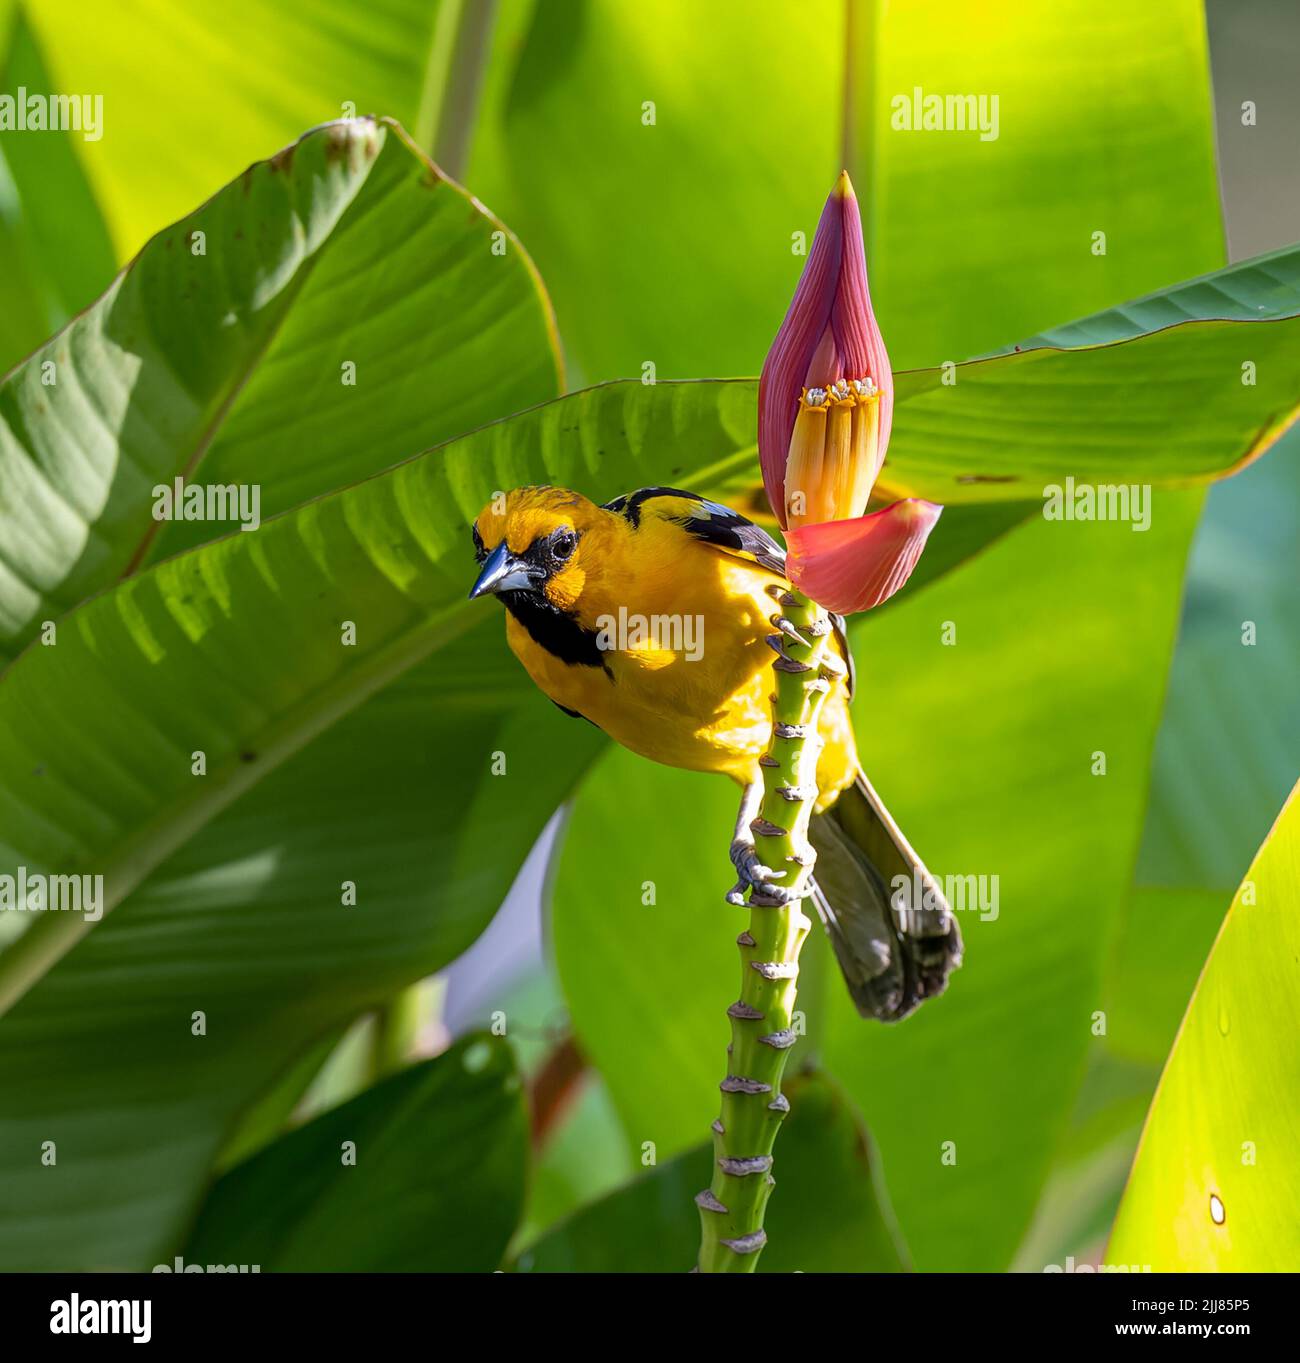 Yellow-tailed Oriole on banana flower, Costa Rica Stock Photo